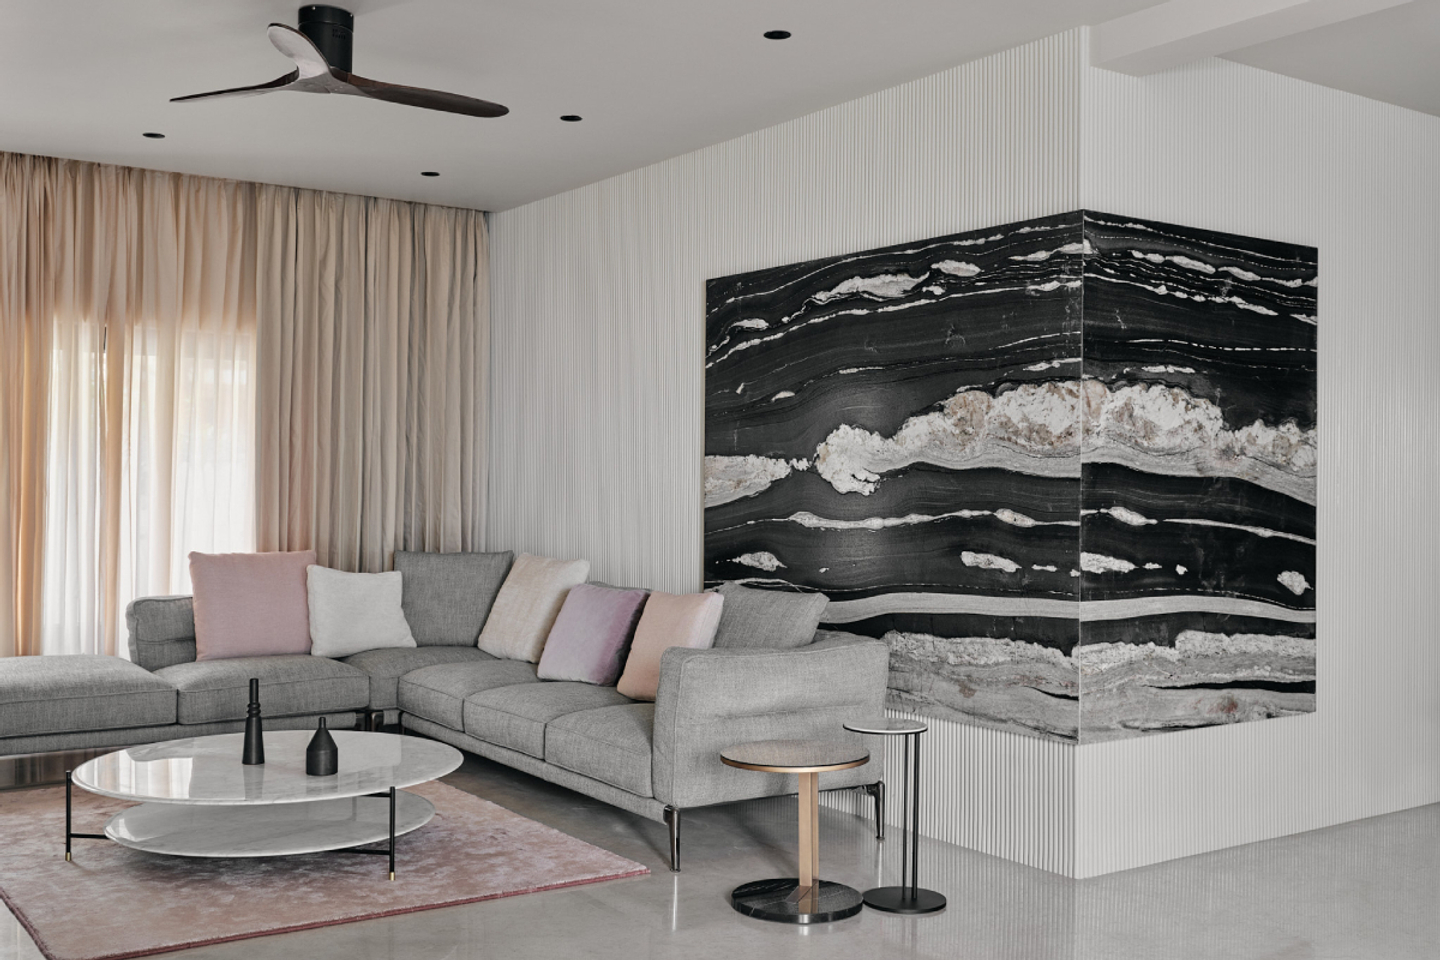 Living Room Design With Wall Mural - Livspace